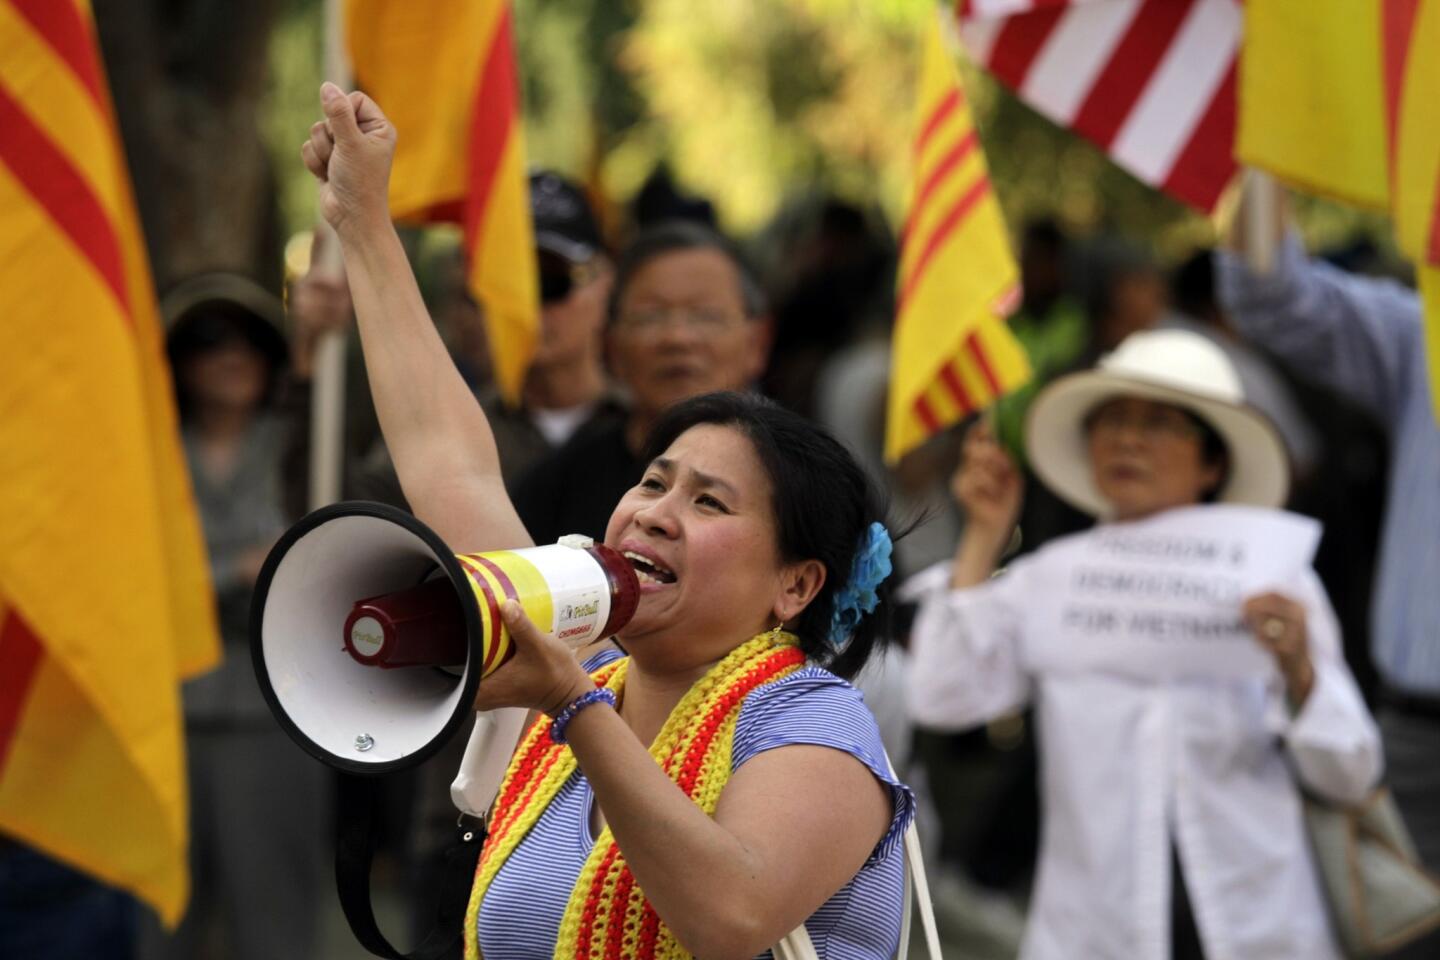 Dung Nguyen is among hundreds of Vietnamese Americans protesting outside the Irvine council meeting over a proposal to establish a "friendship" with Nha Trang, a coastal town in Vietnam.